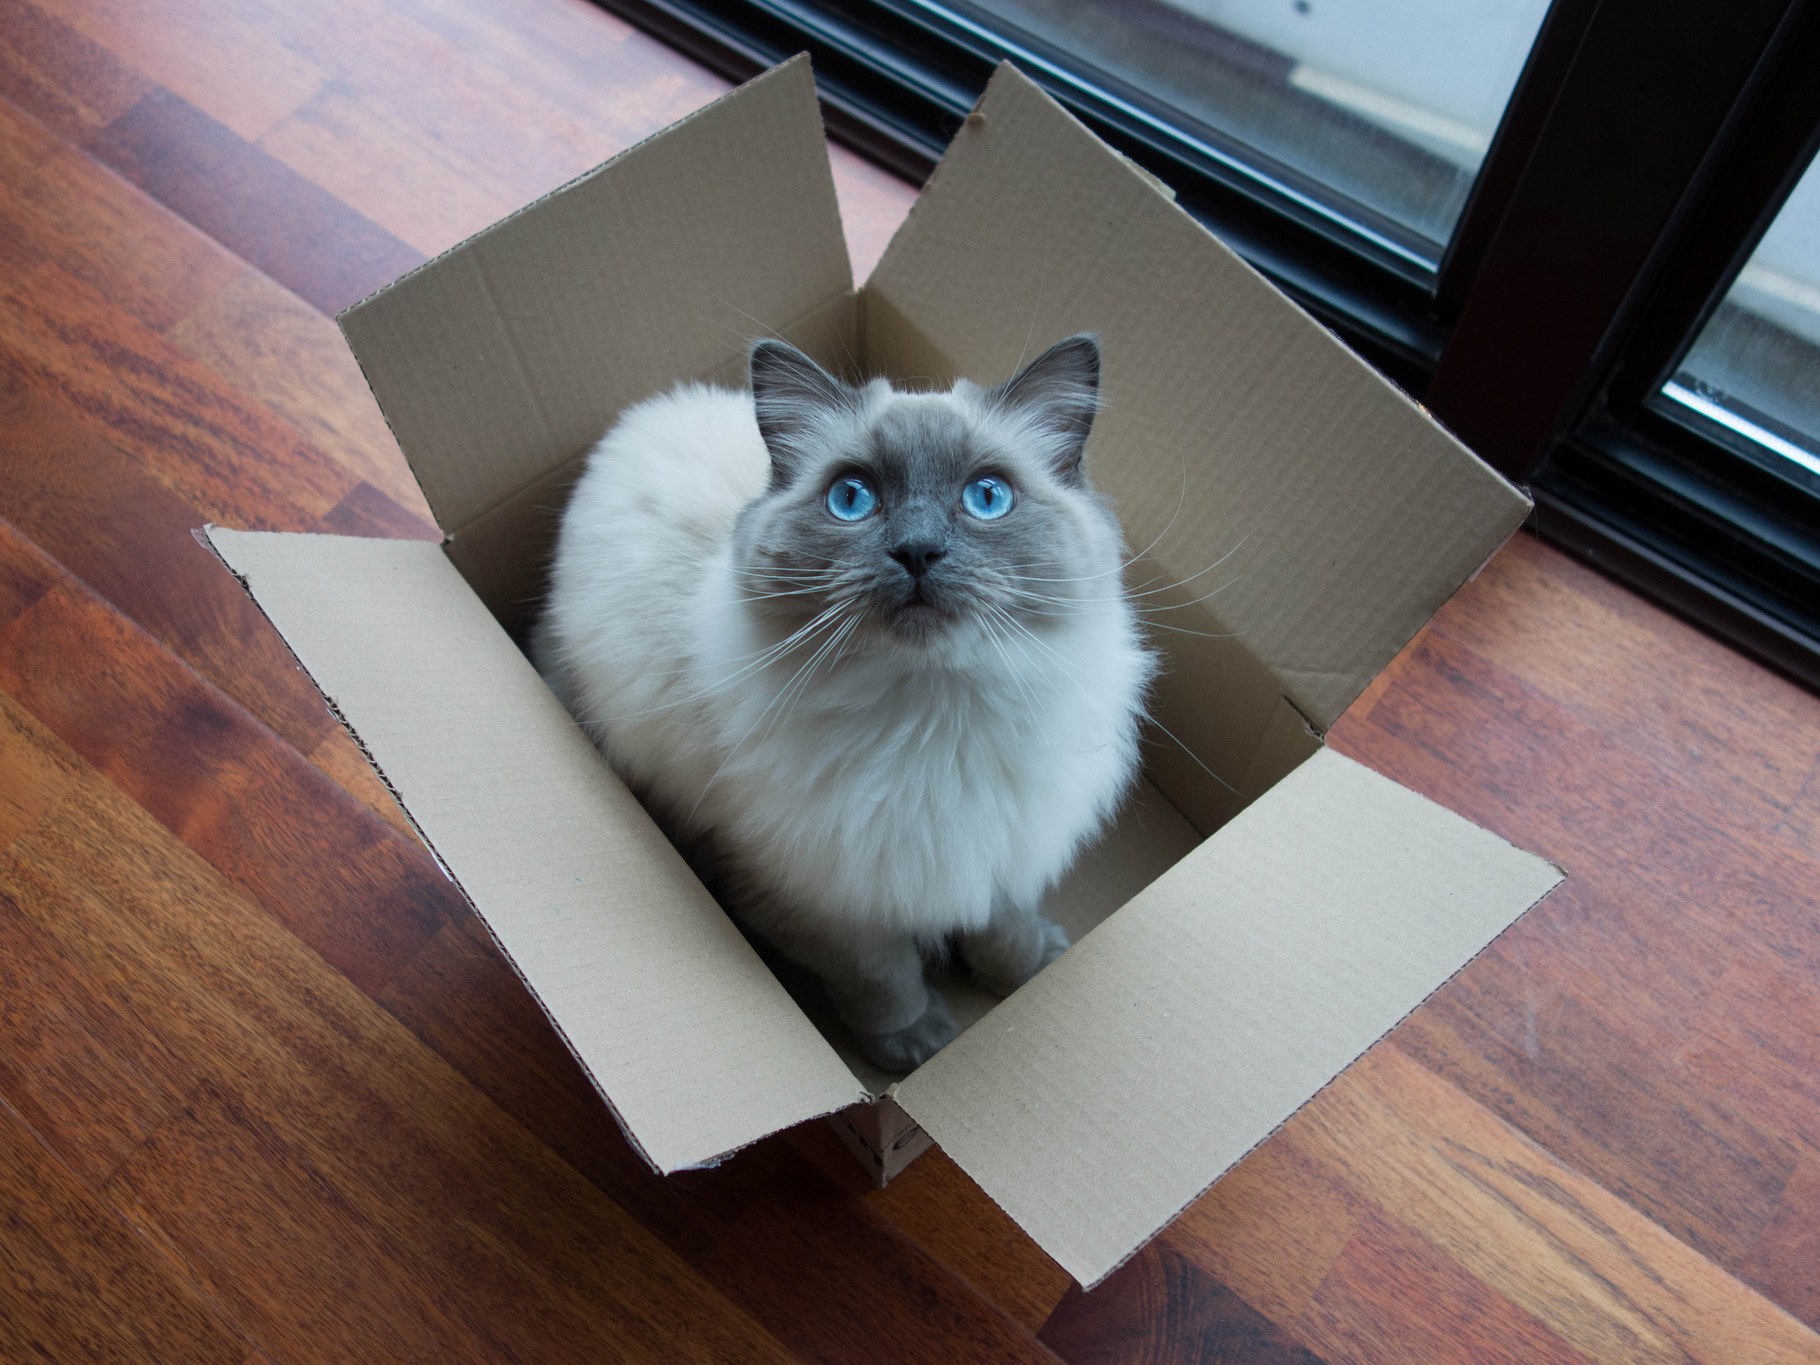 What's Up With That: Why Do Cats Love Boxes So Much? | WIRED